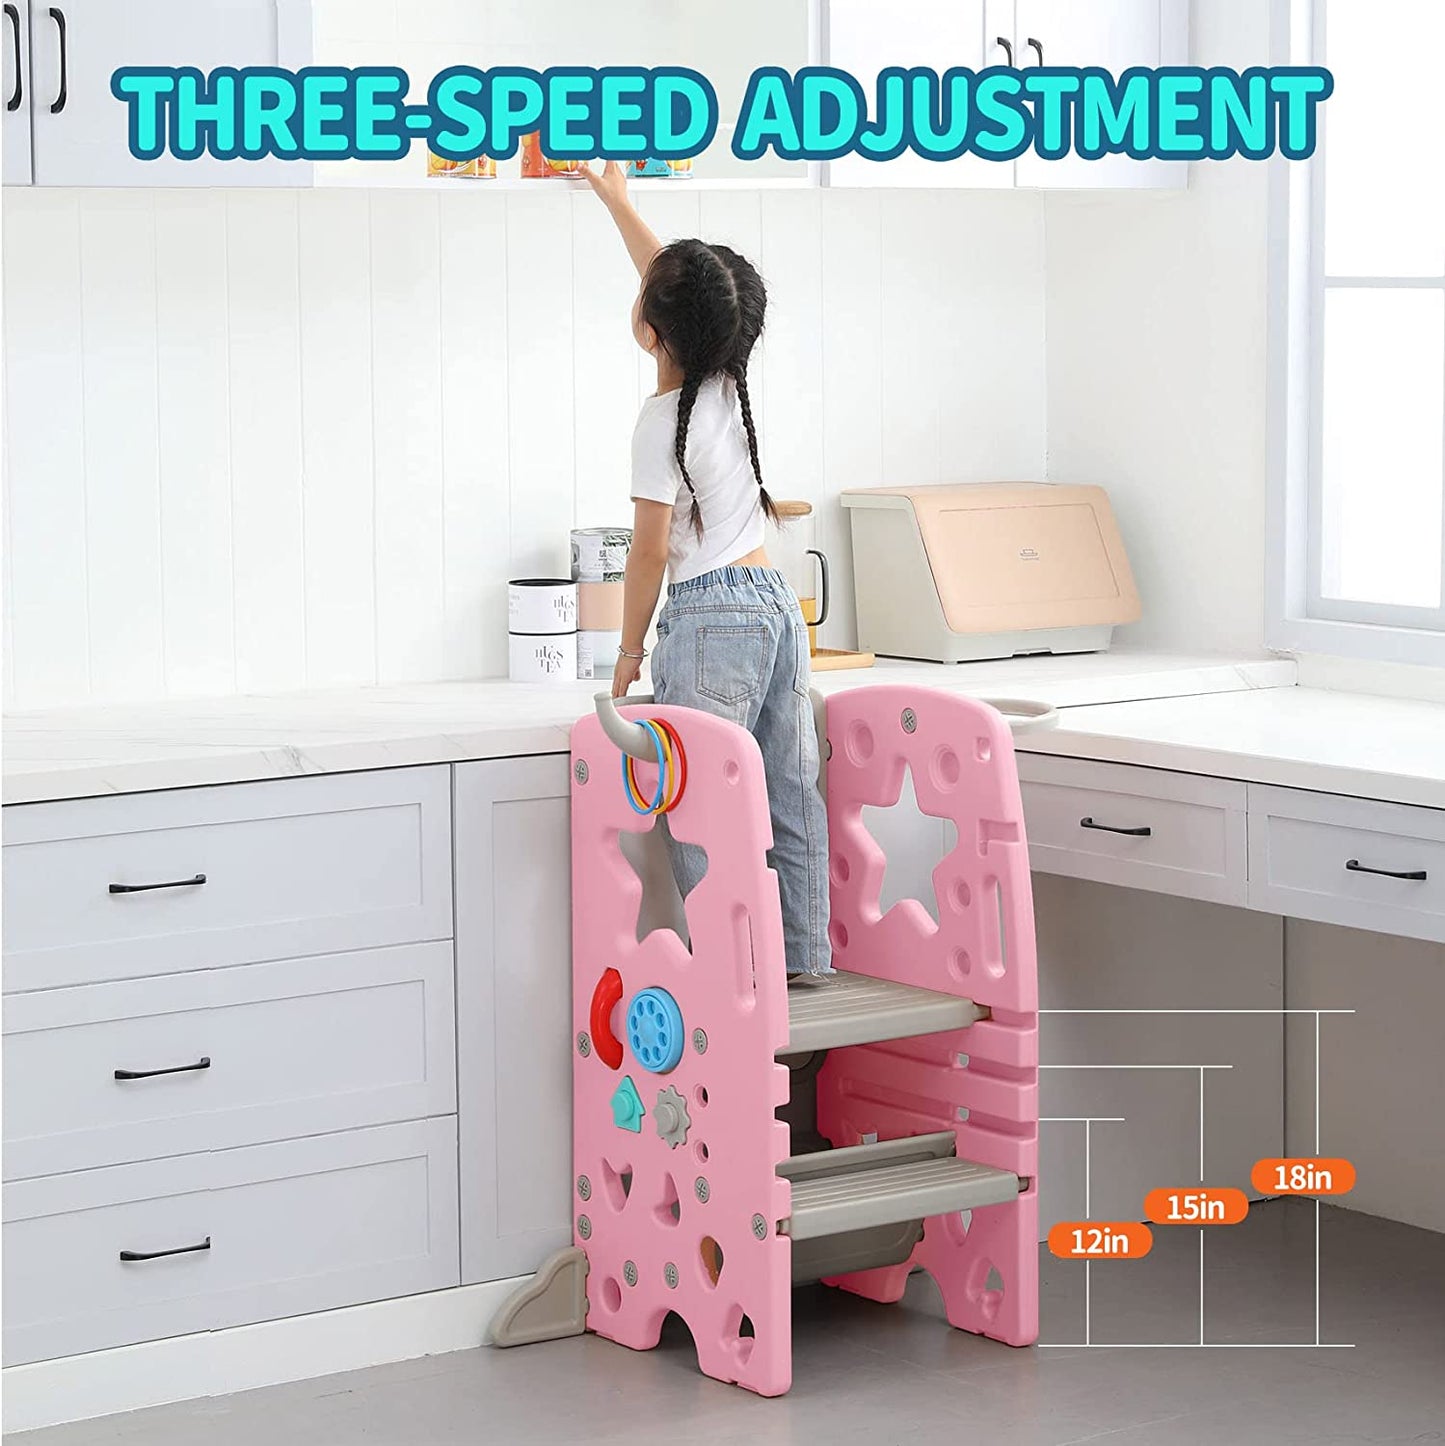 UNICOO –Kids Kitchen Step Stool with Double Safety Rails, Toddler Learning Stool with 3 Adjustable Heights and Non-Slip Foot Pads, Toddler Tower (OMLT)